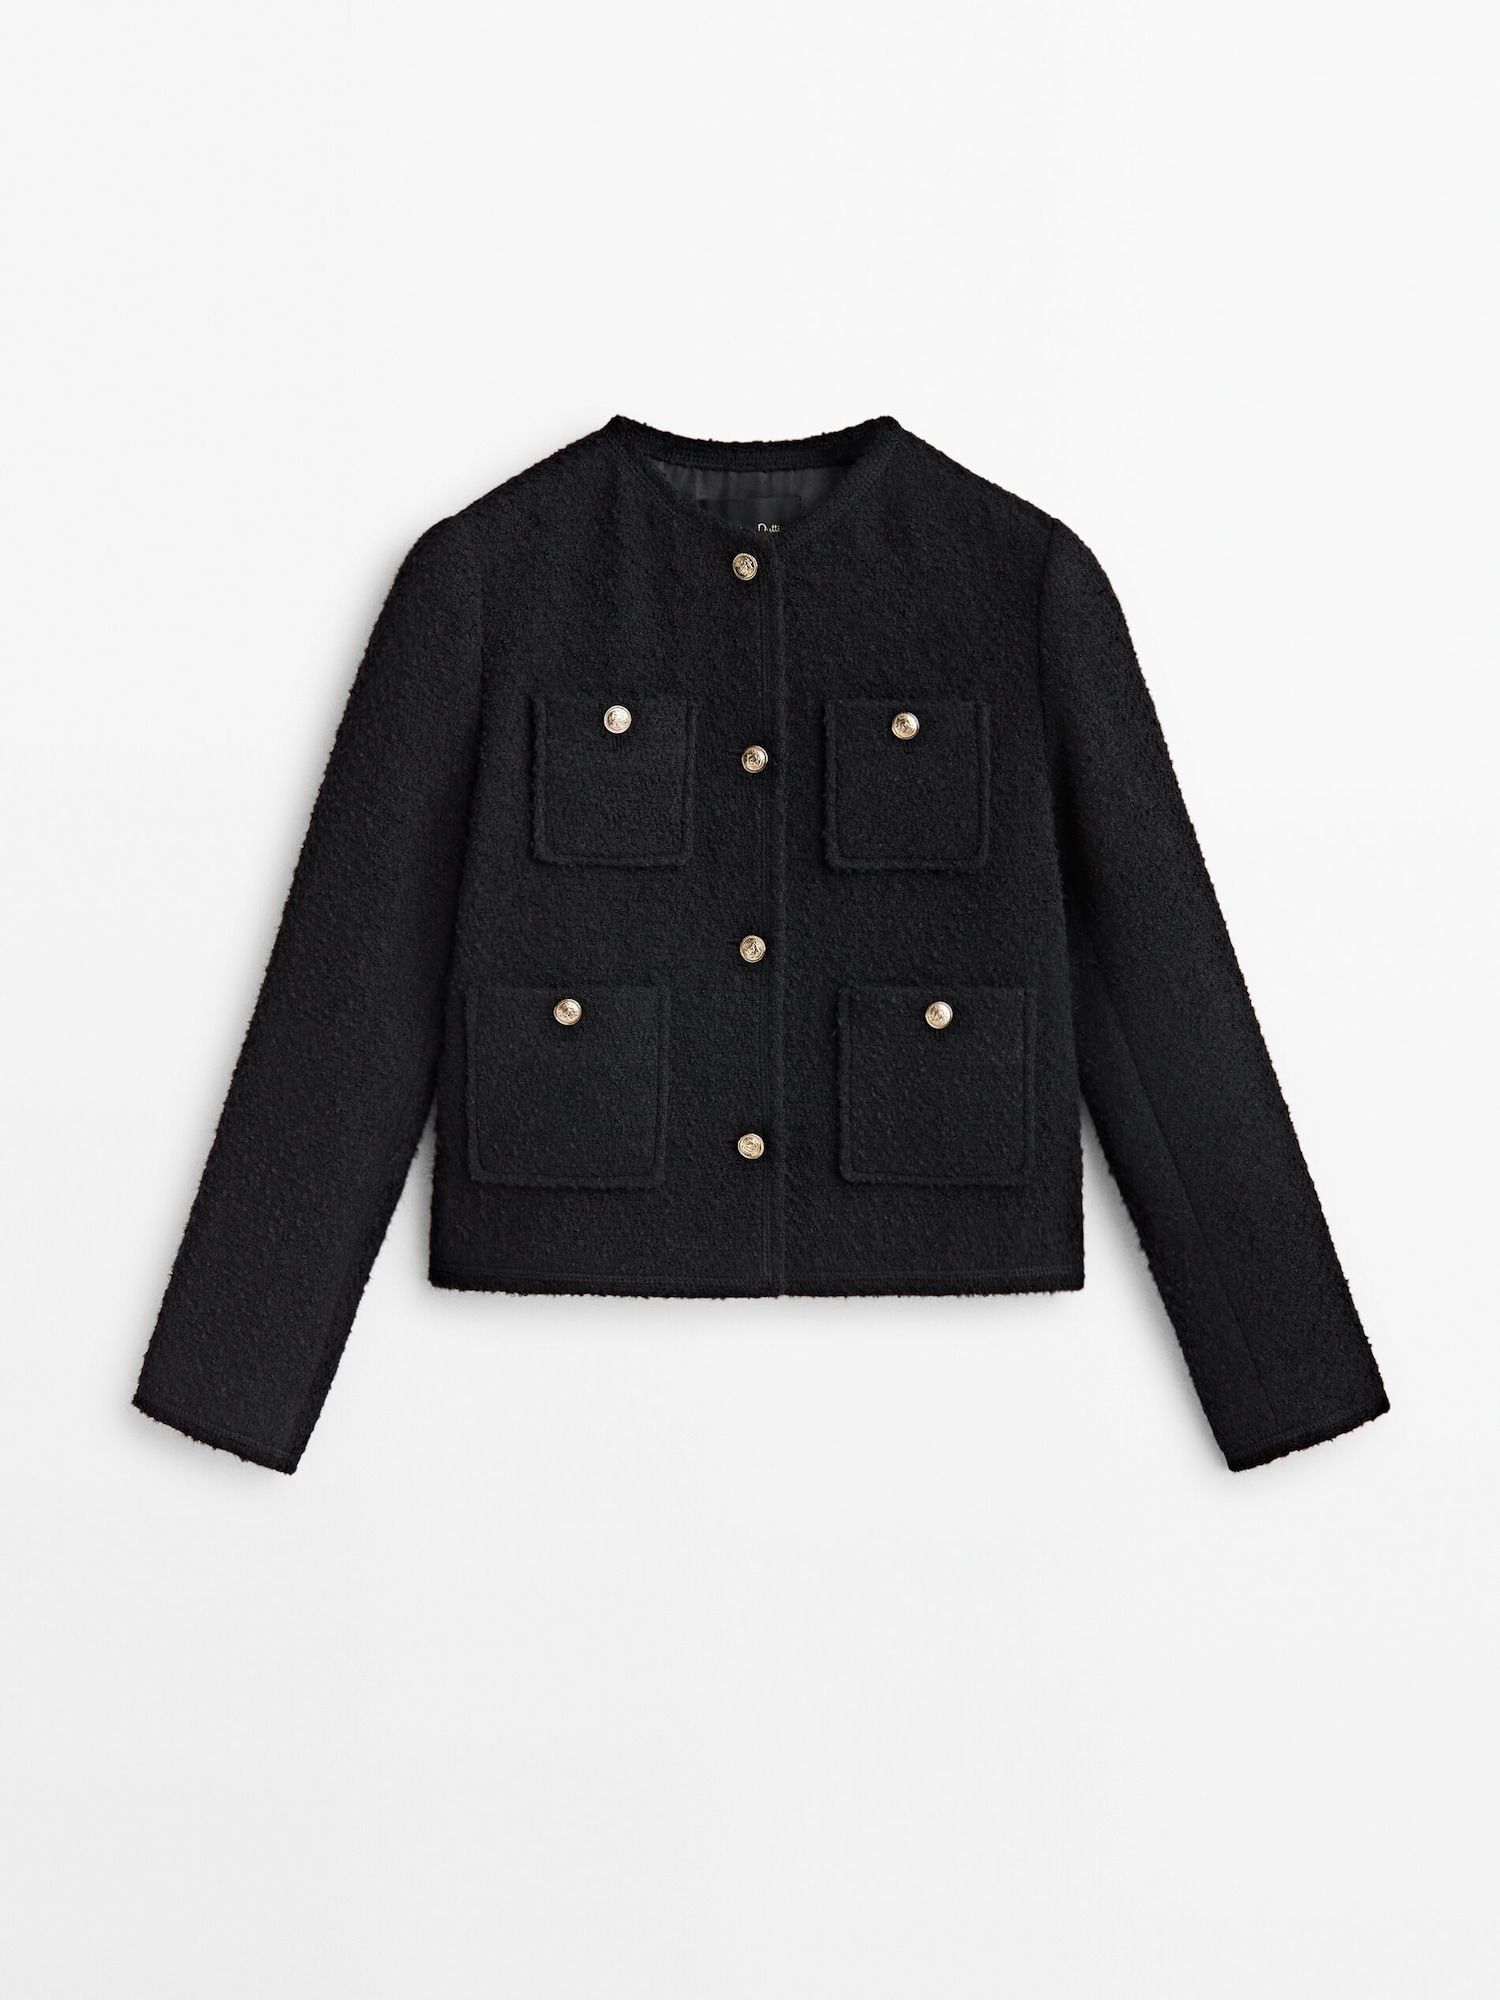 Textured cropped jacket with four pockets | Massimo Dutti UK